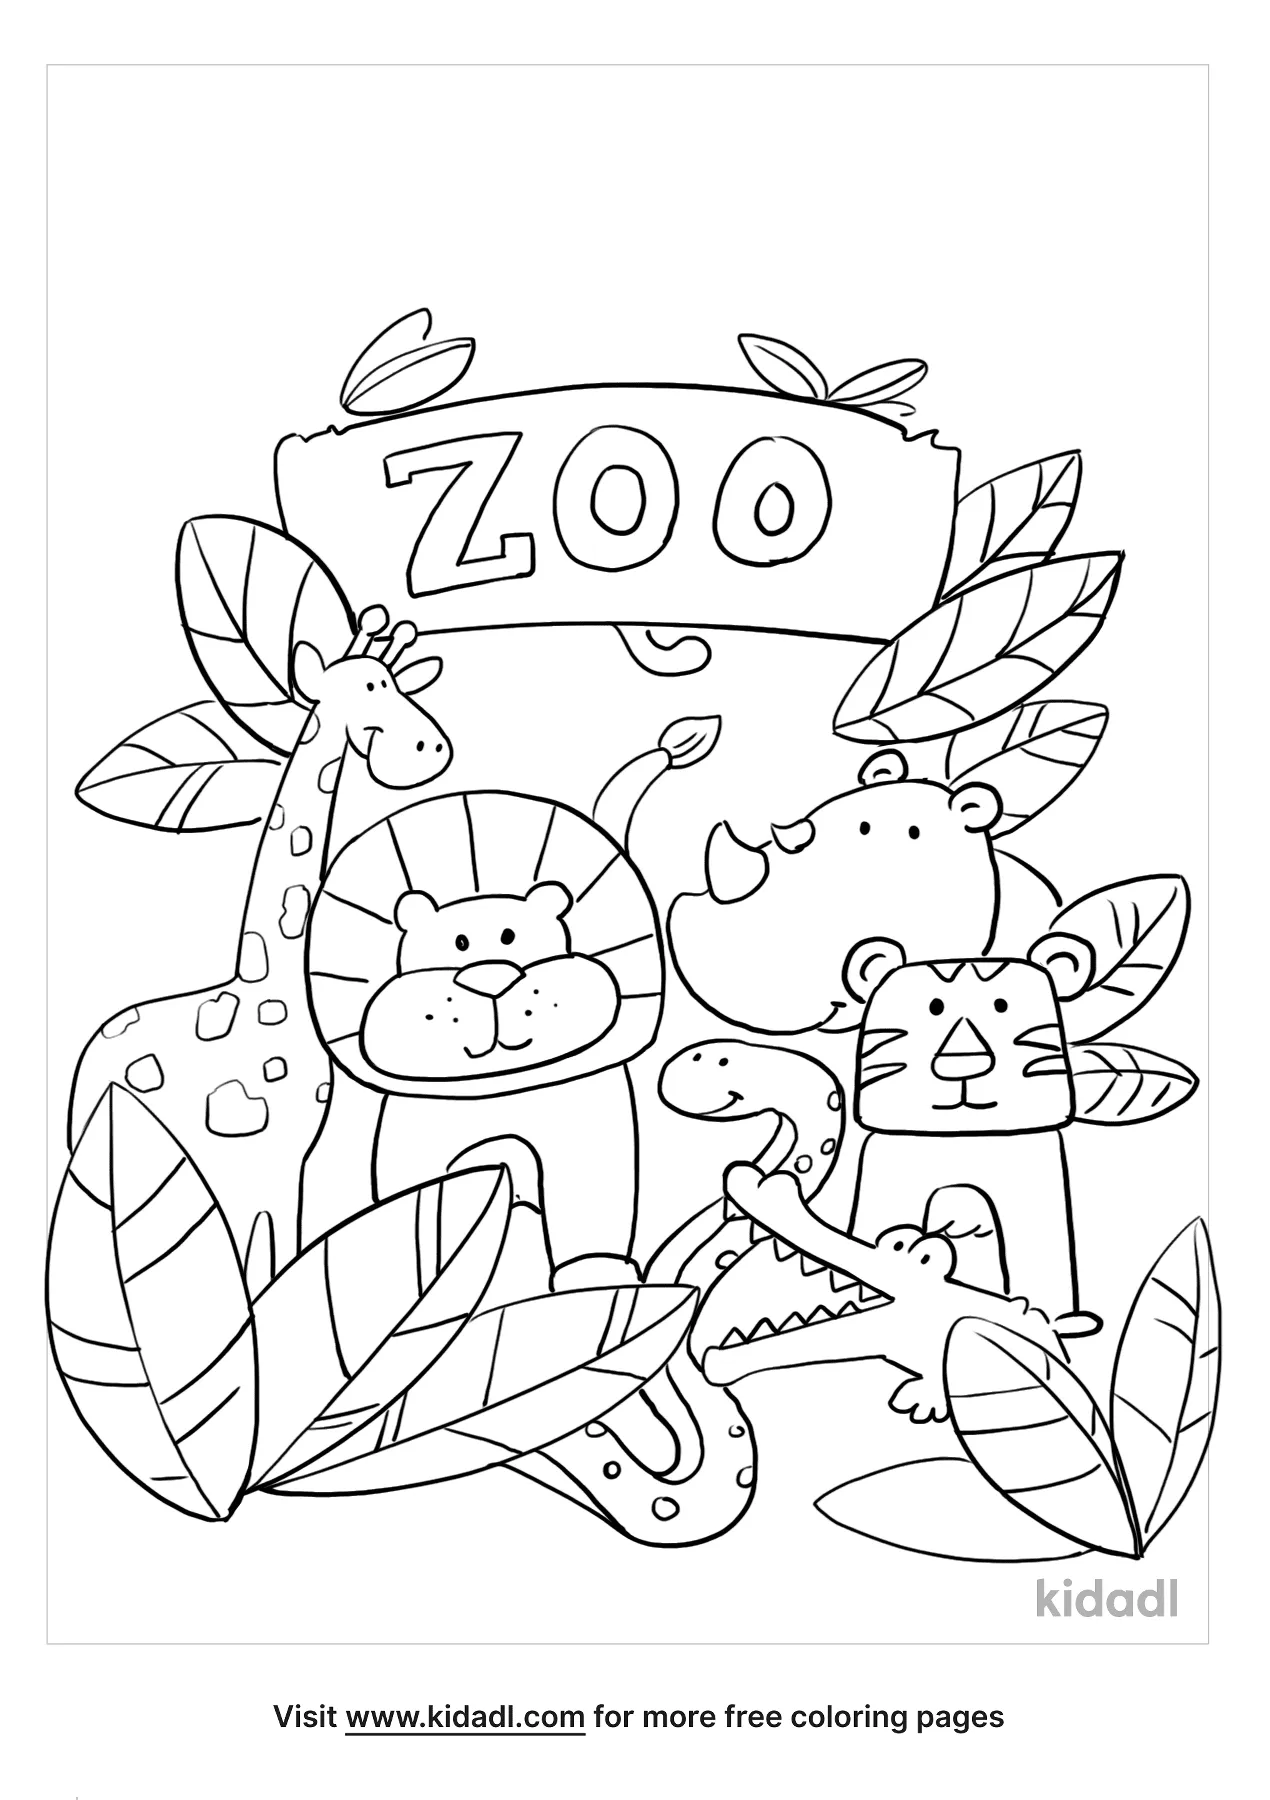 Zoo Coloring Pages   Free Zoo Coloring Pages   Kidadl